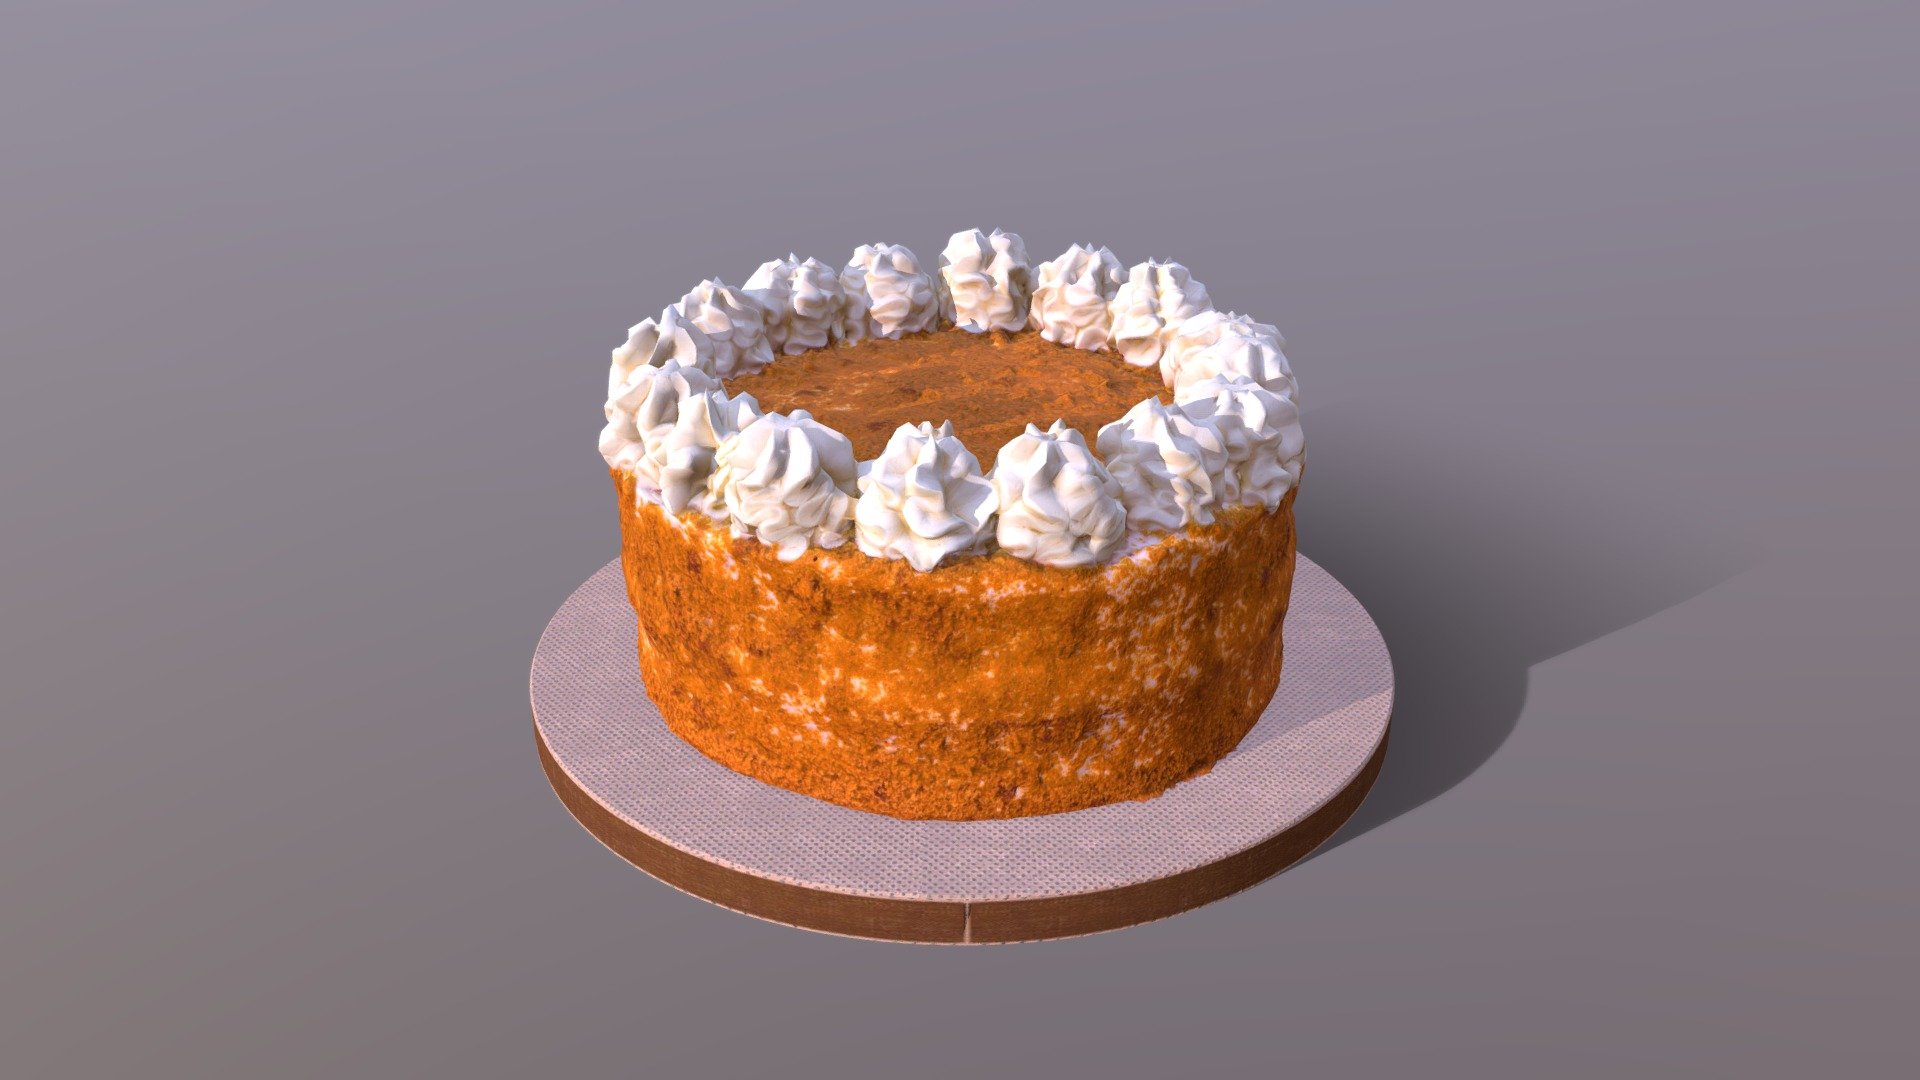 This premium Caramel Crumbled Cake model was created using photogrammetry which is made by CAKESBURG Premium Cake Shop in the UK. You can purchase real cake from this link: https://cakesburg.co.uk/products/red-velvet-buttercream-cake?_pos=2&amp;_sid=a9ff9af21&amp;_ss=r

Textures 4096*4096px PBR photoscan-based materials Base Color, Normal, Roughness, Specular)Published by 3ds Max

Click here for the the cut &amp; slice version.

Click here for a slice of cake model 3d model